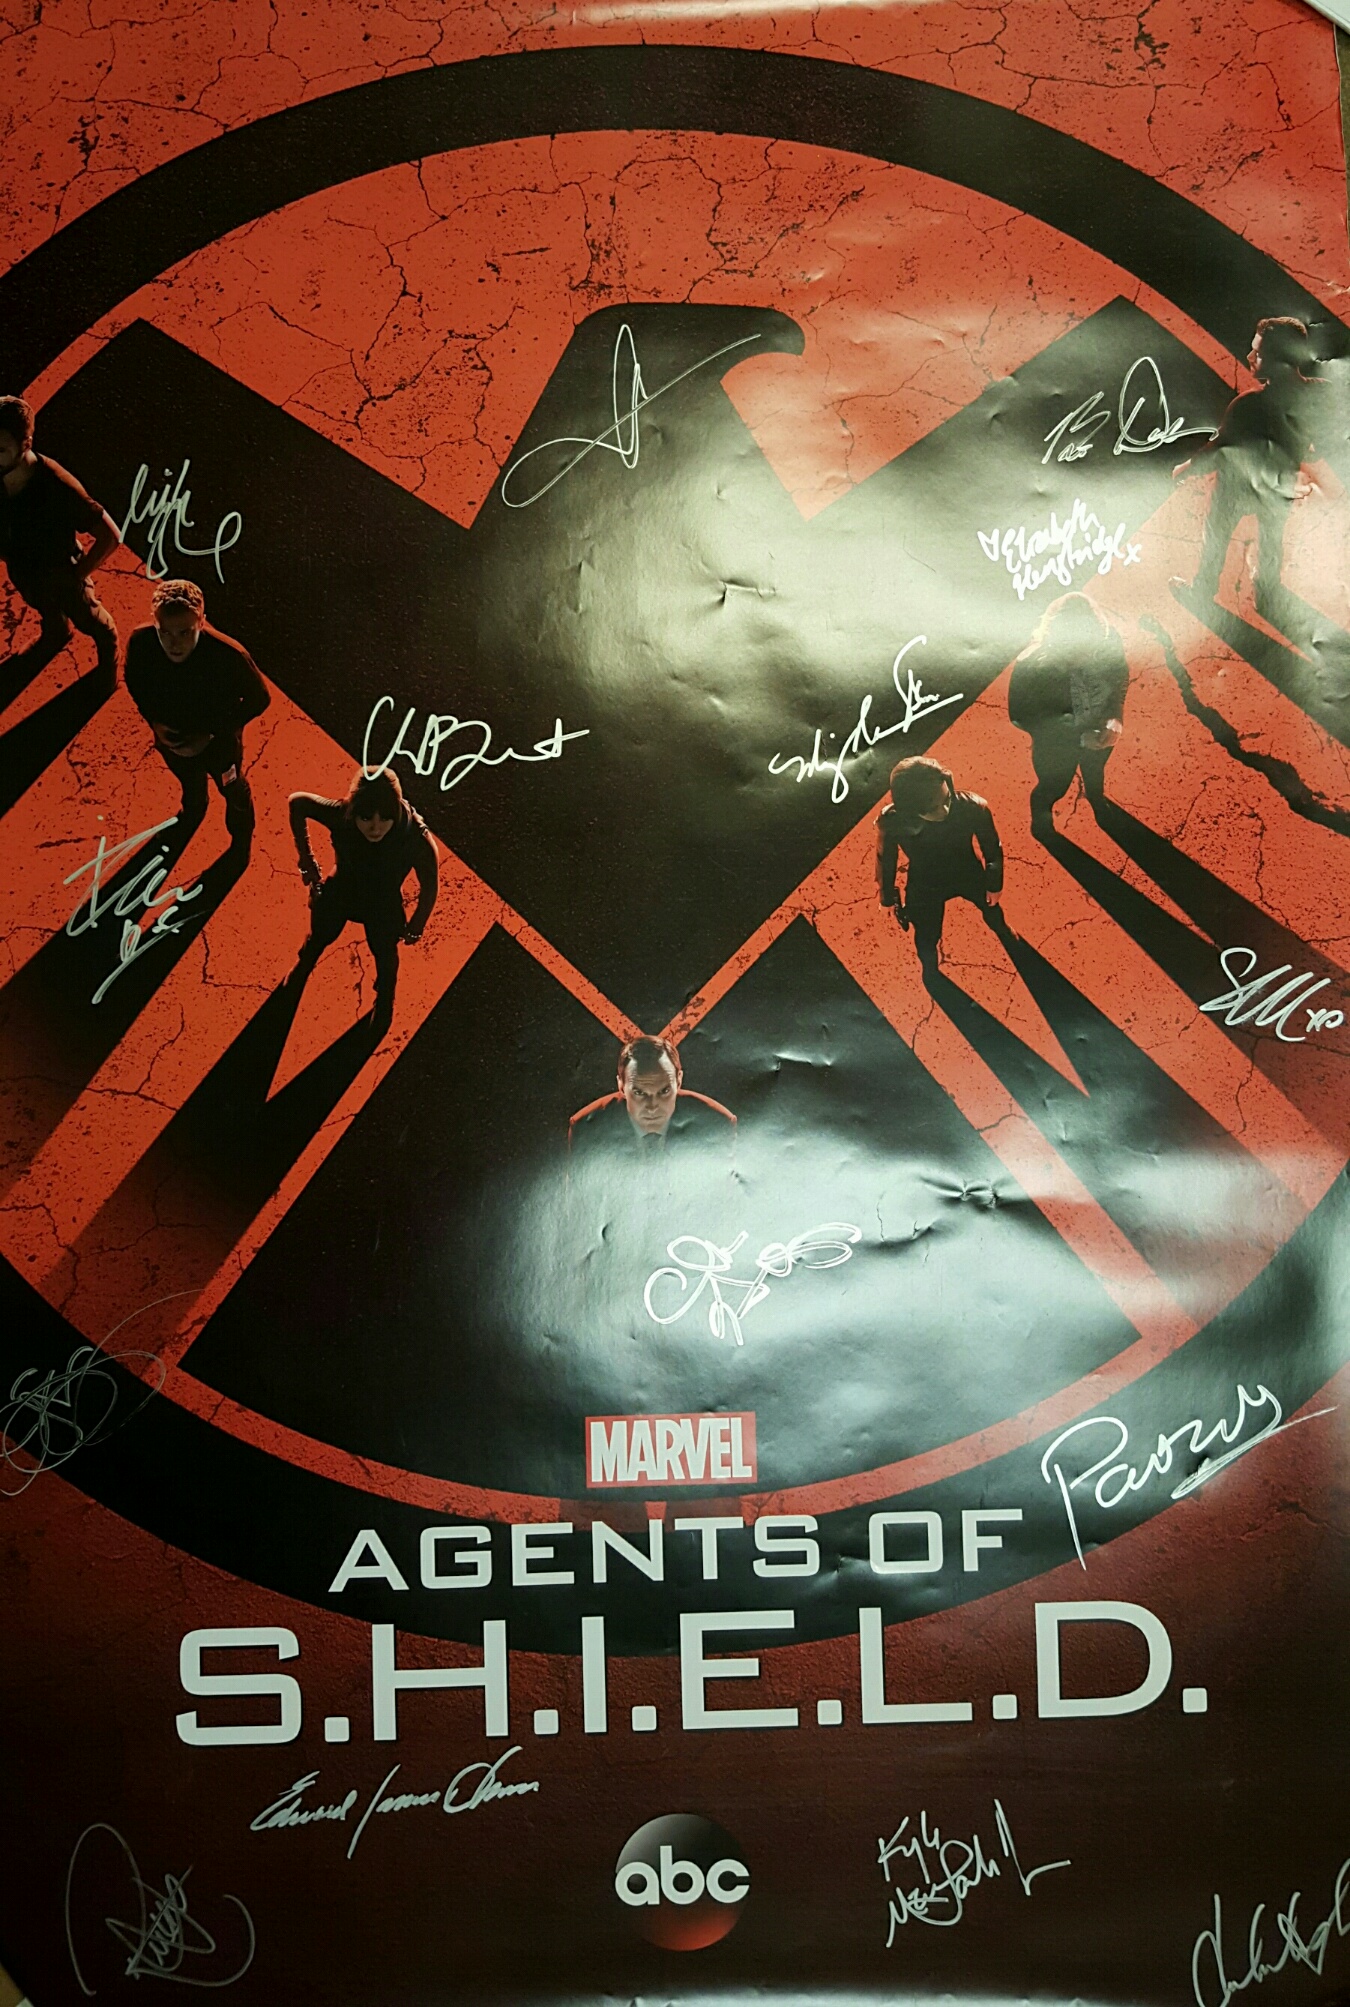 Agents of SHIELD Items Still Available on eBay!